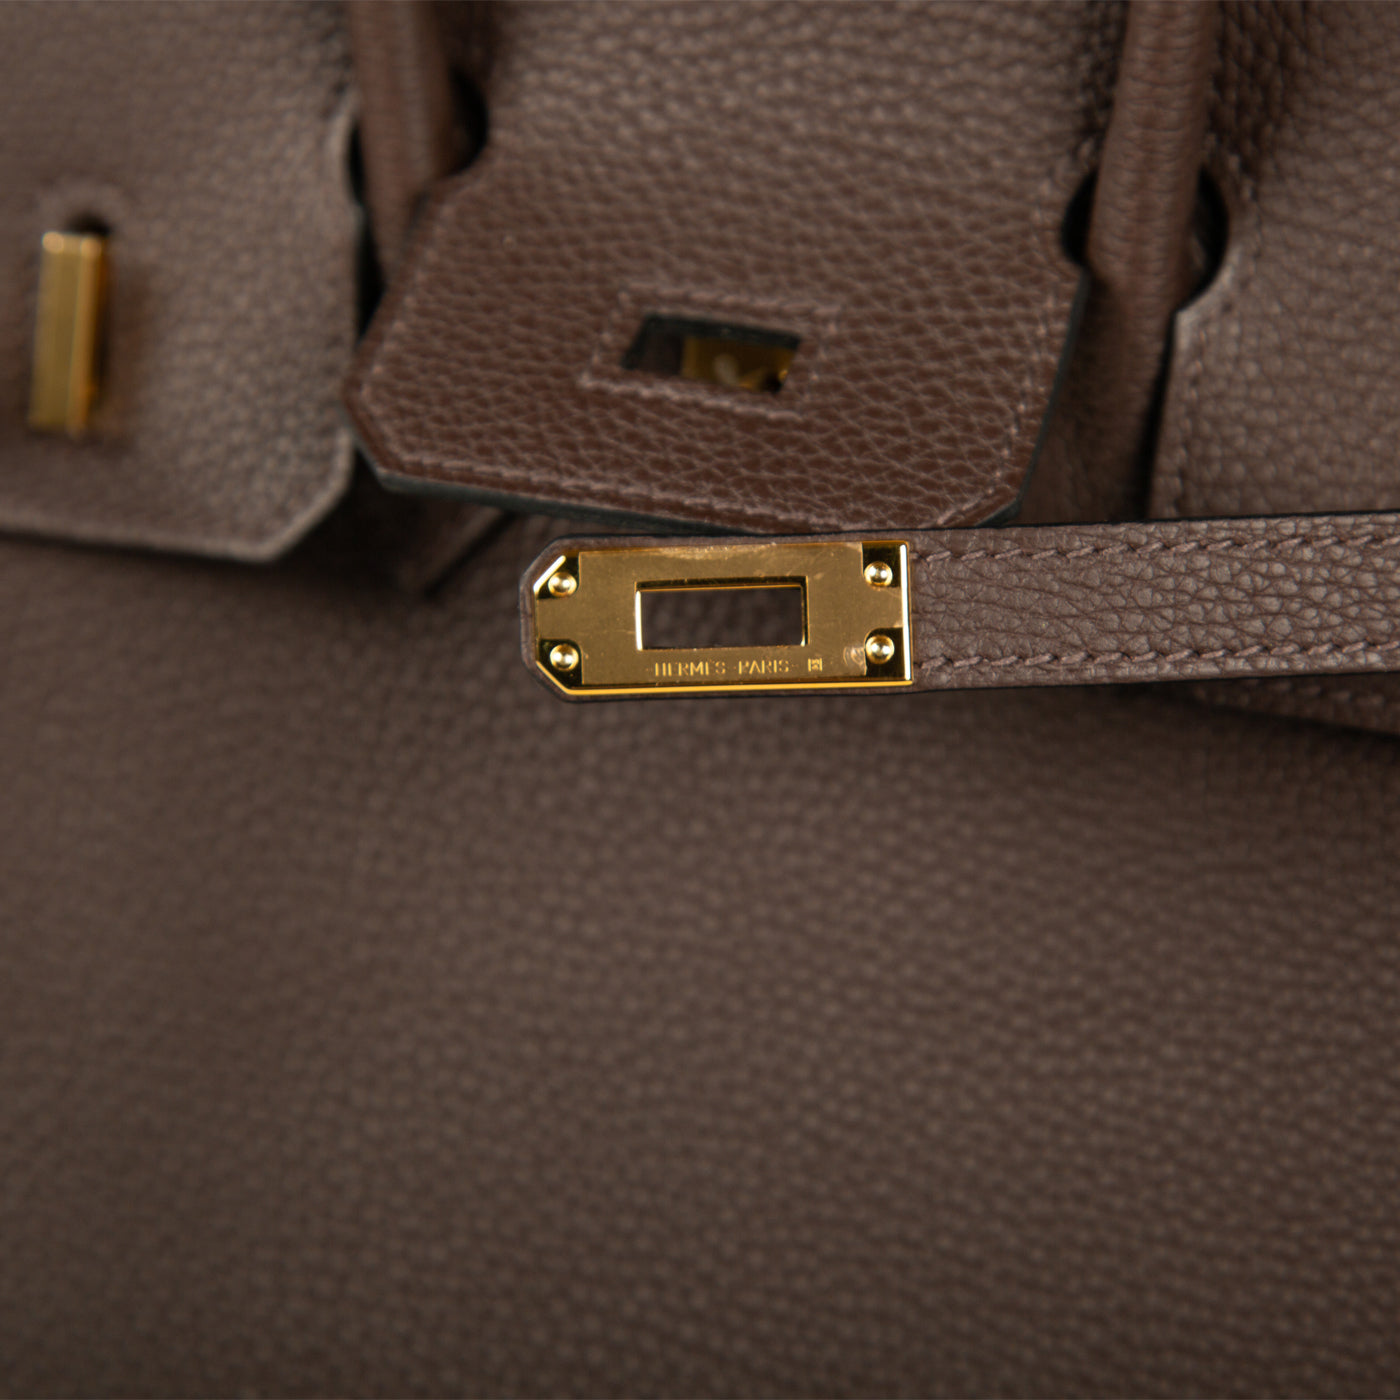 Hermes Birkin 25 in Chocolate Togo Leather and GHW